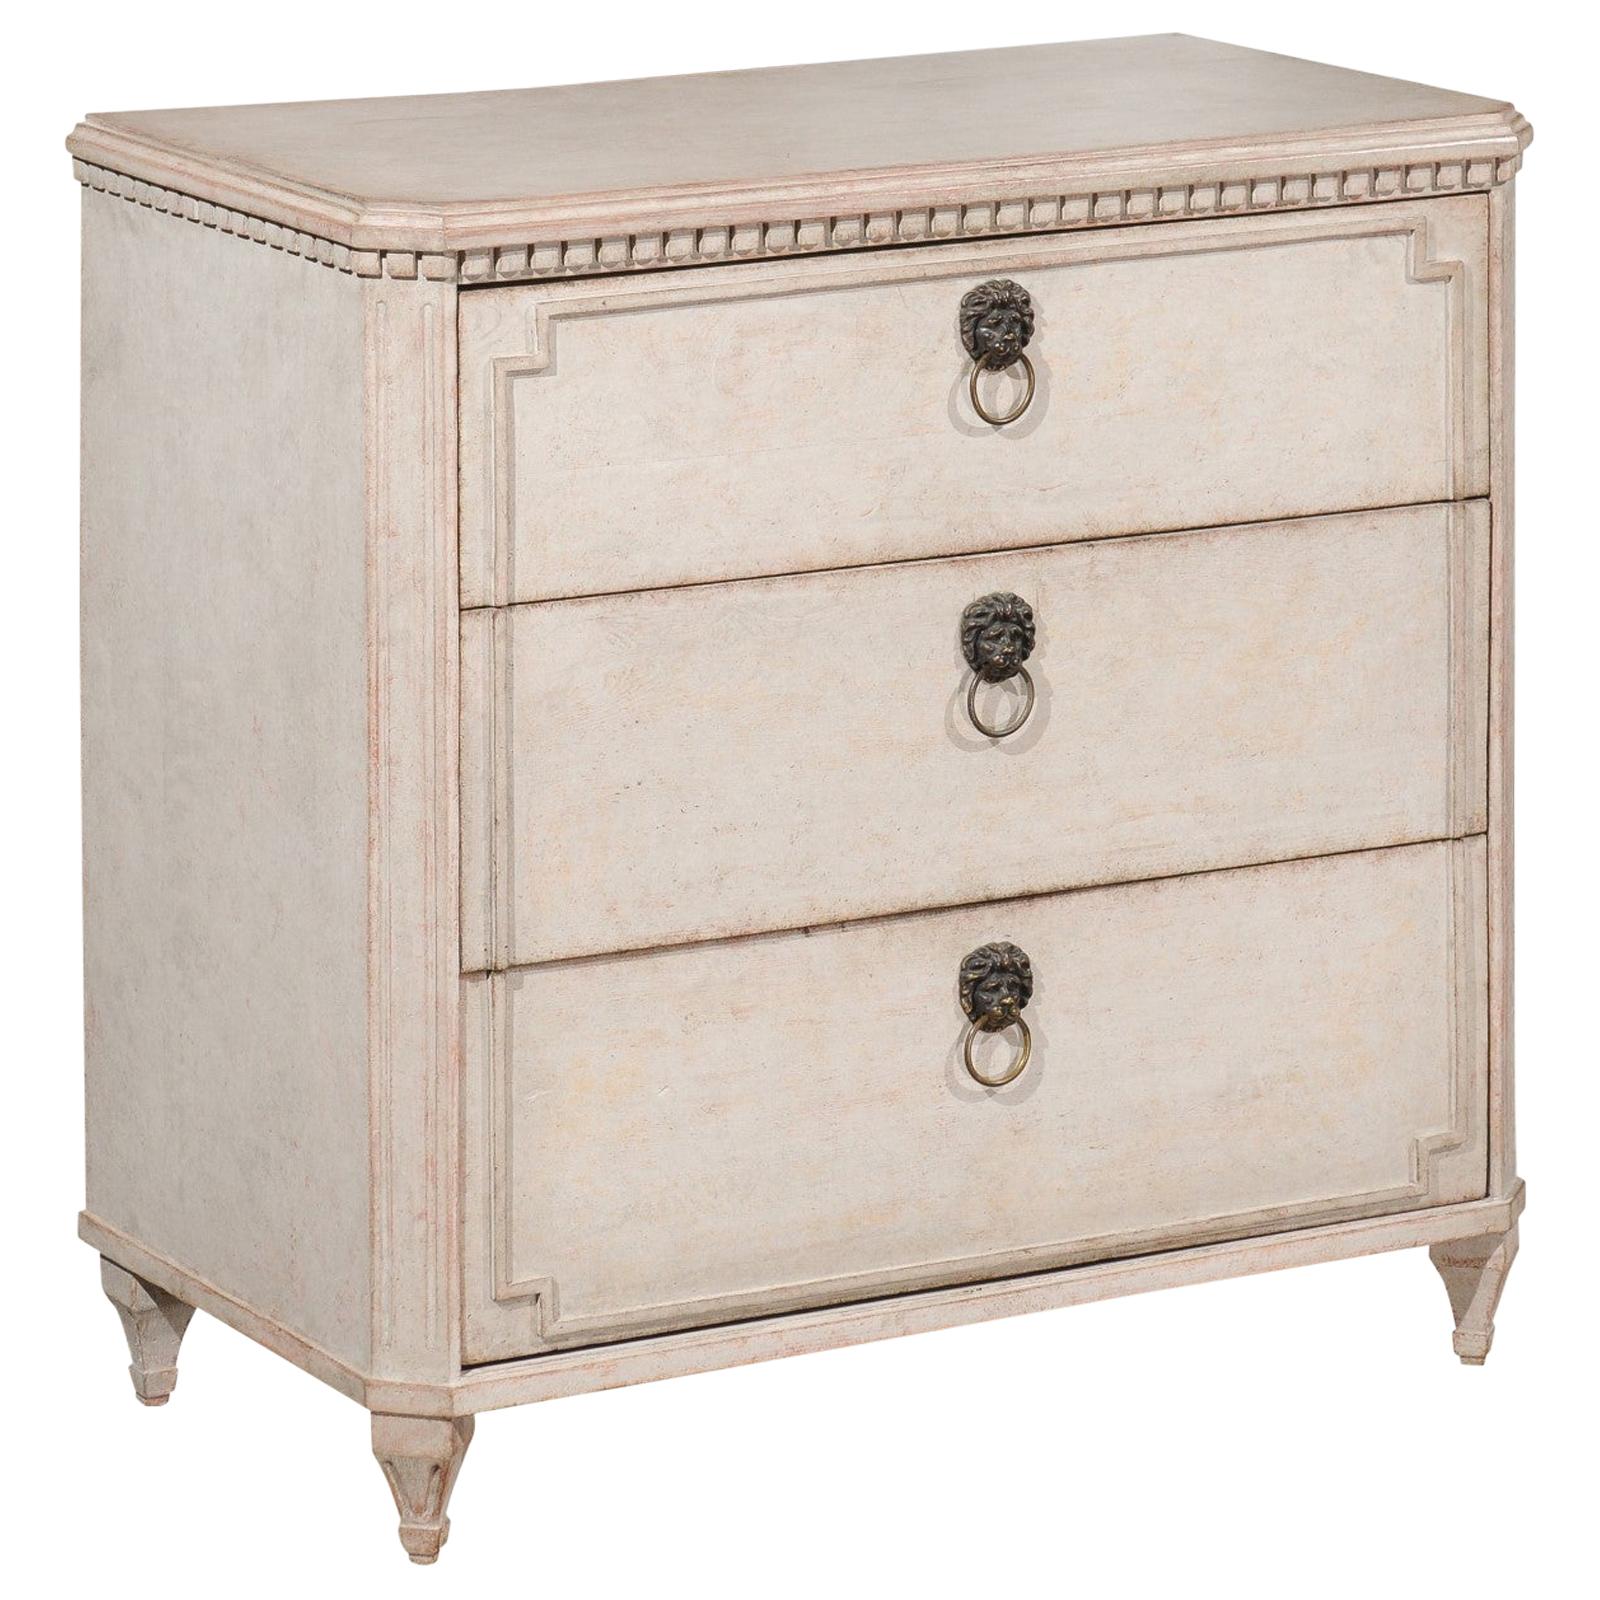 Swedish Gustavian Style 19th Century Painted Three-Drawer Chest with Dentil